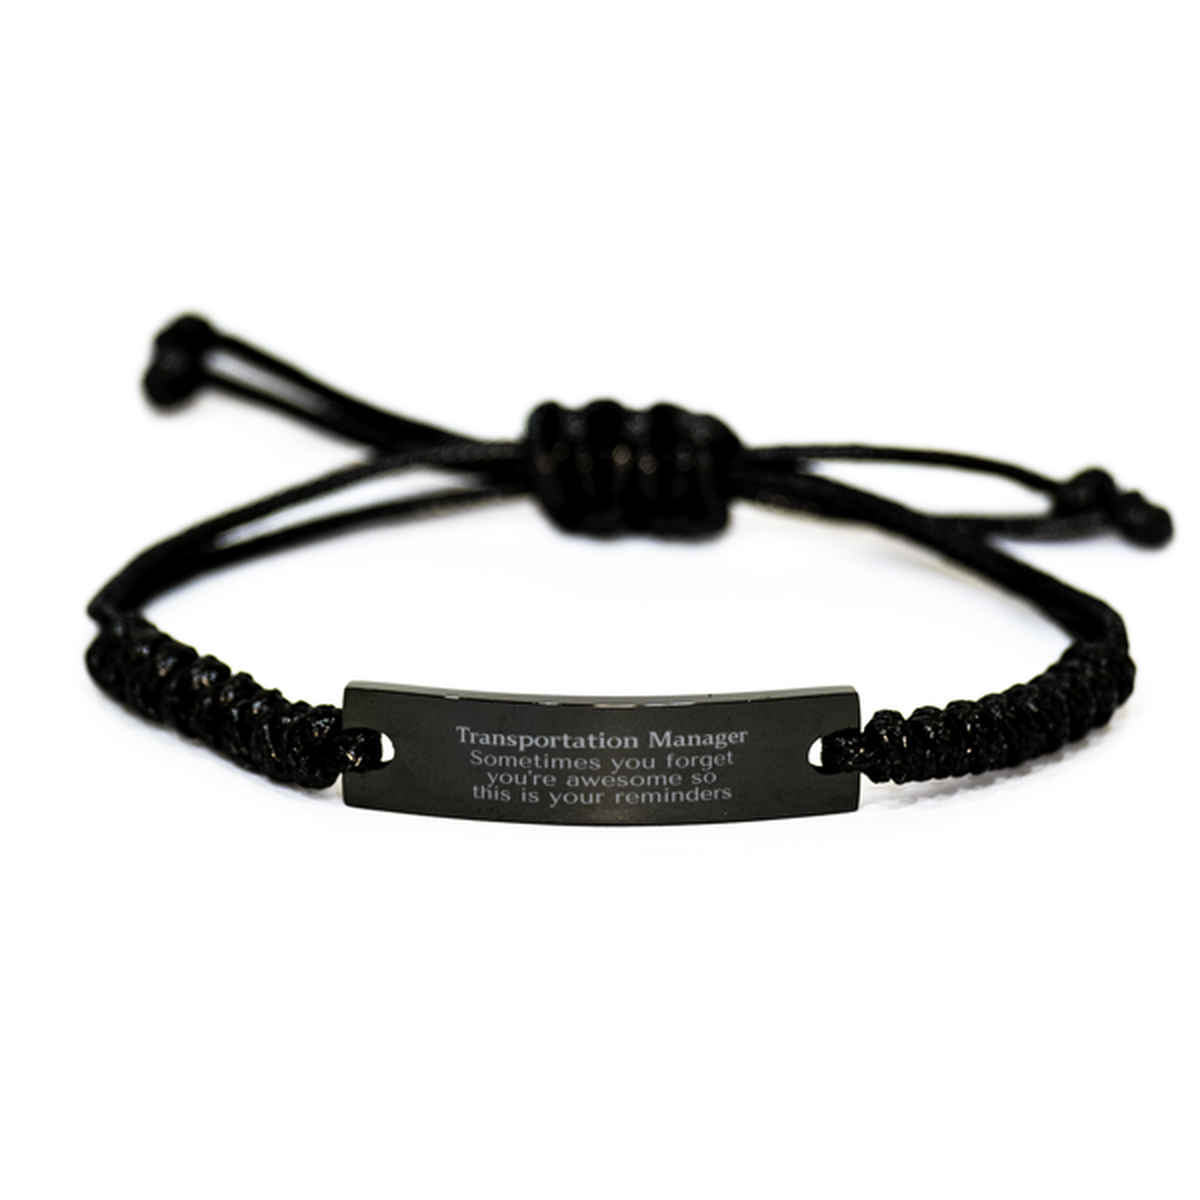 Sentimental Transportation Manager Black Rope Bracelet, Transportation Manager Sometimes you forget you're awesome so this is your reminders, Graduation Christmas Birthday Gifts for Transportation Manager, Men, Women, Coworkers